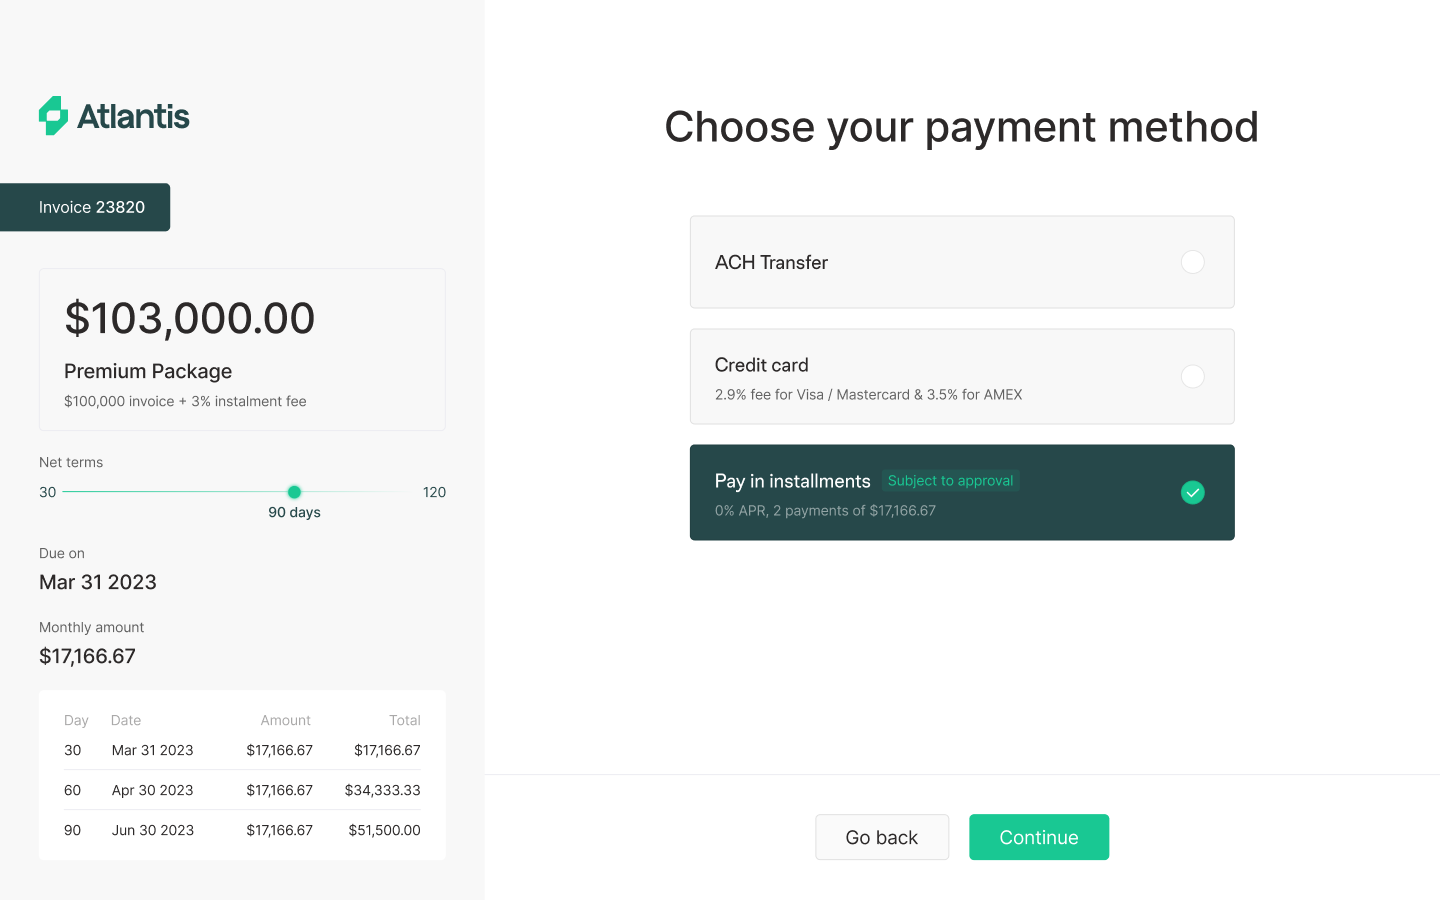 Allow your end-customers to choose from multiple payment options when paying their invoices.